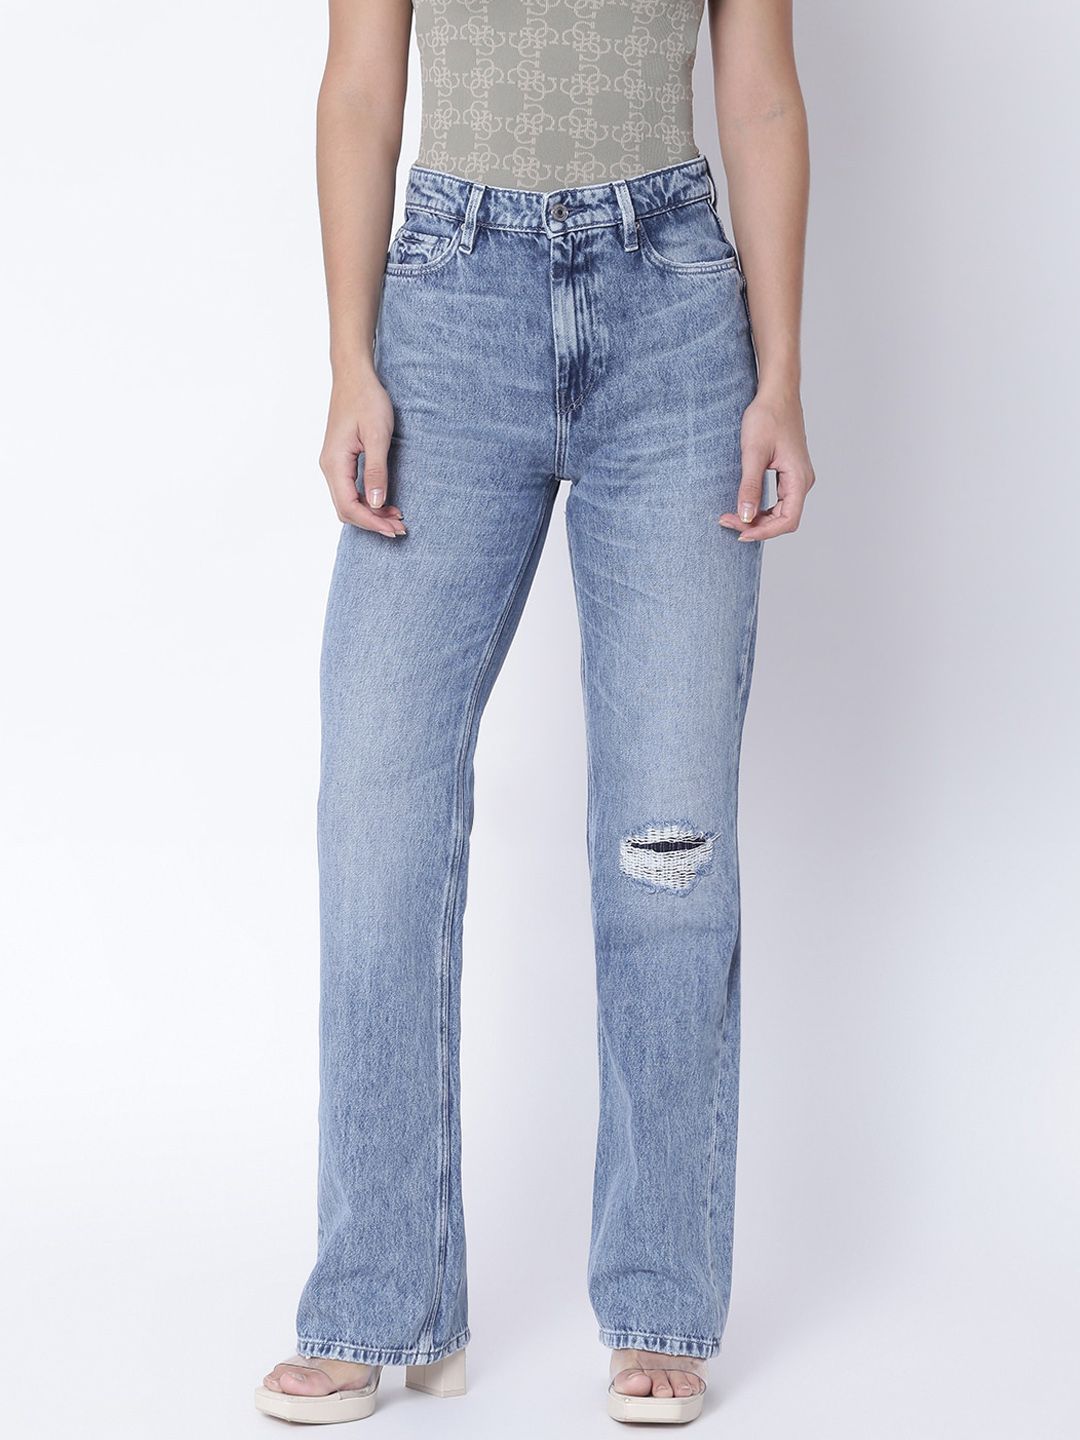 GUESS Women Assorted Mildly Distressed Light Fade Jeans Price in India